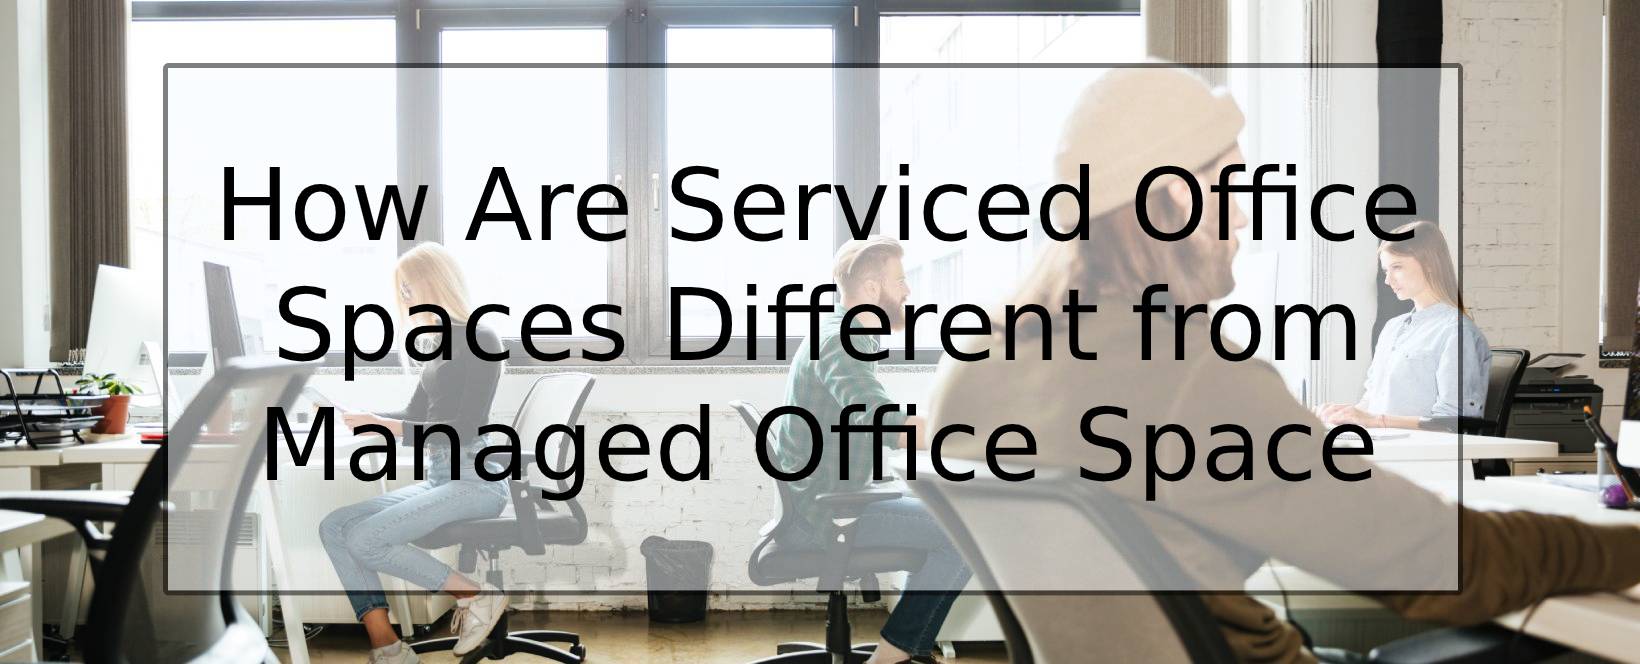 How Are Serviced Office Spaces Different from Managed Office Space